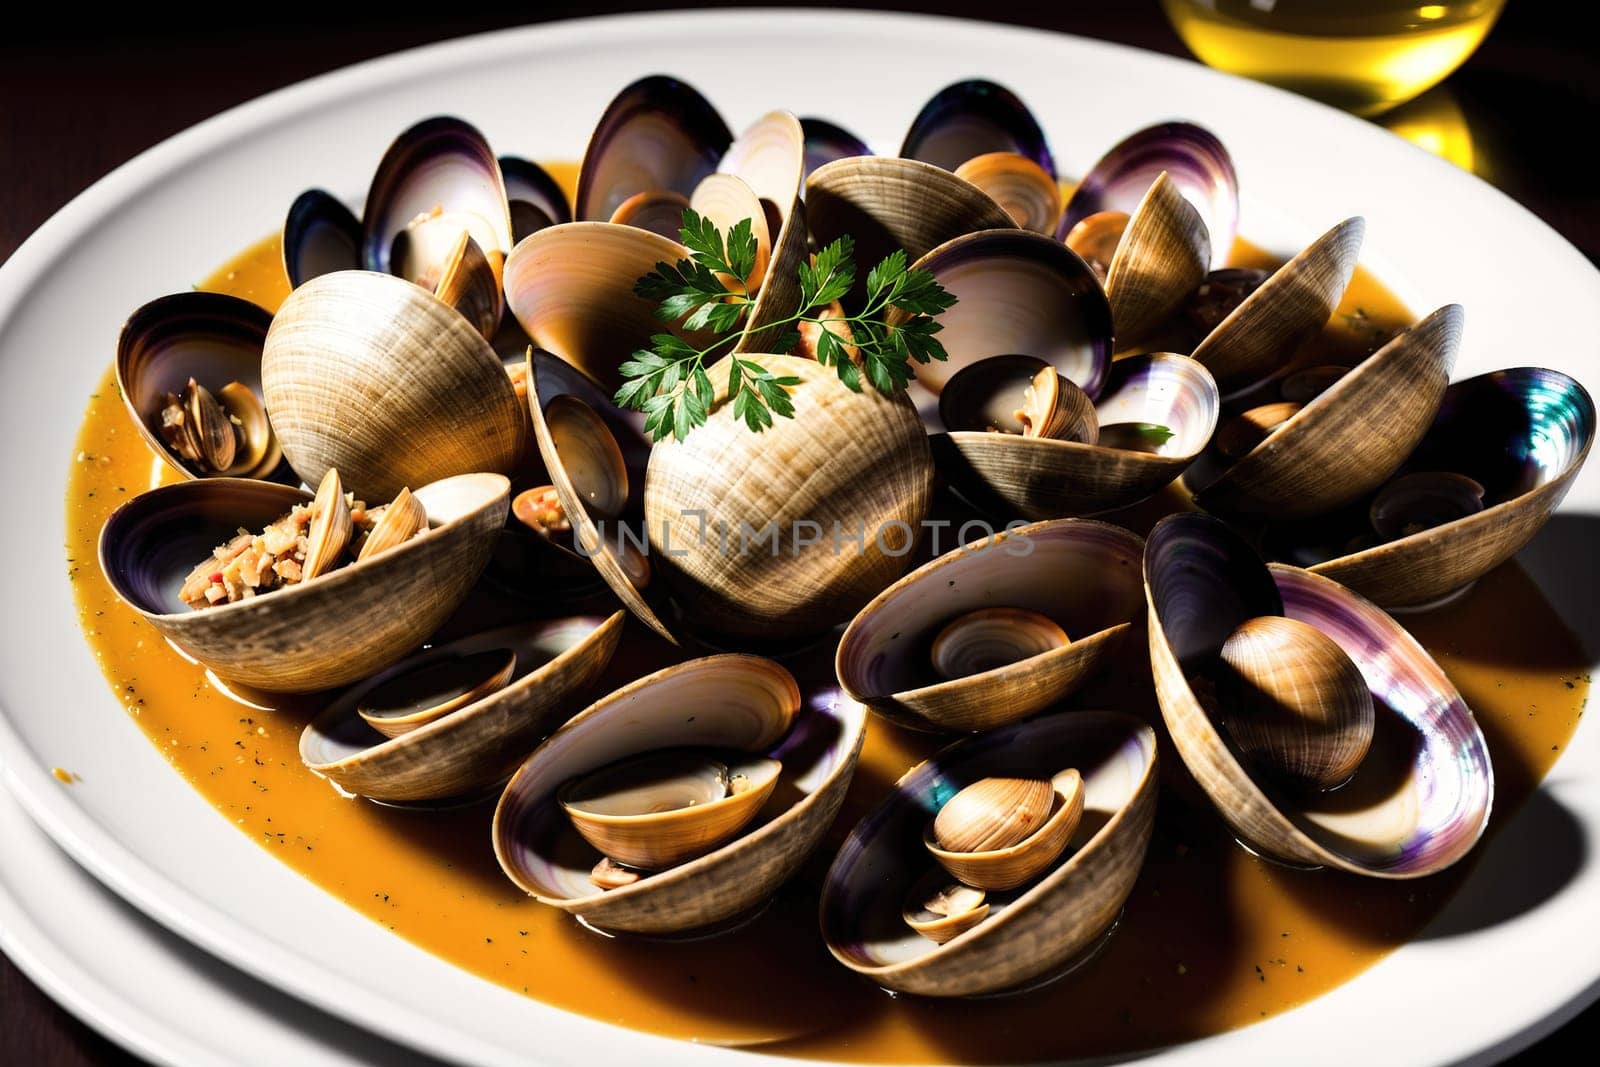 The image shows a plate of steamed mussels with garlic and parsley on a white tablecloth.